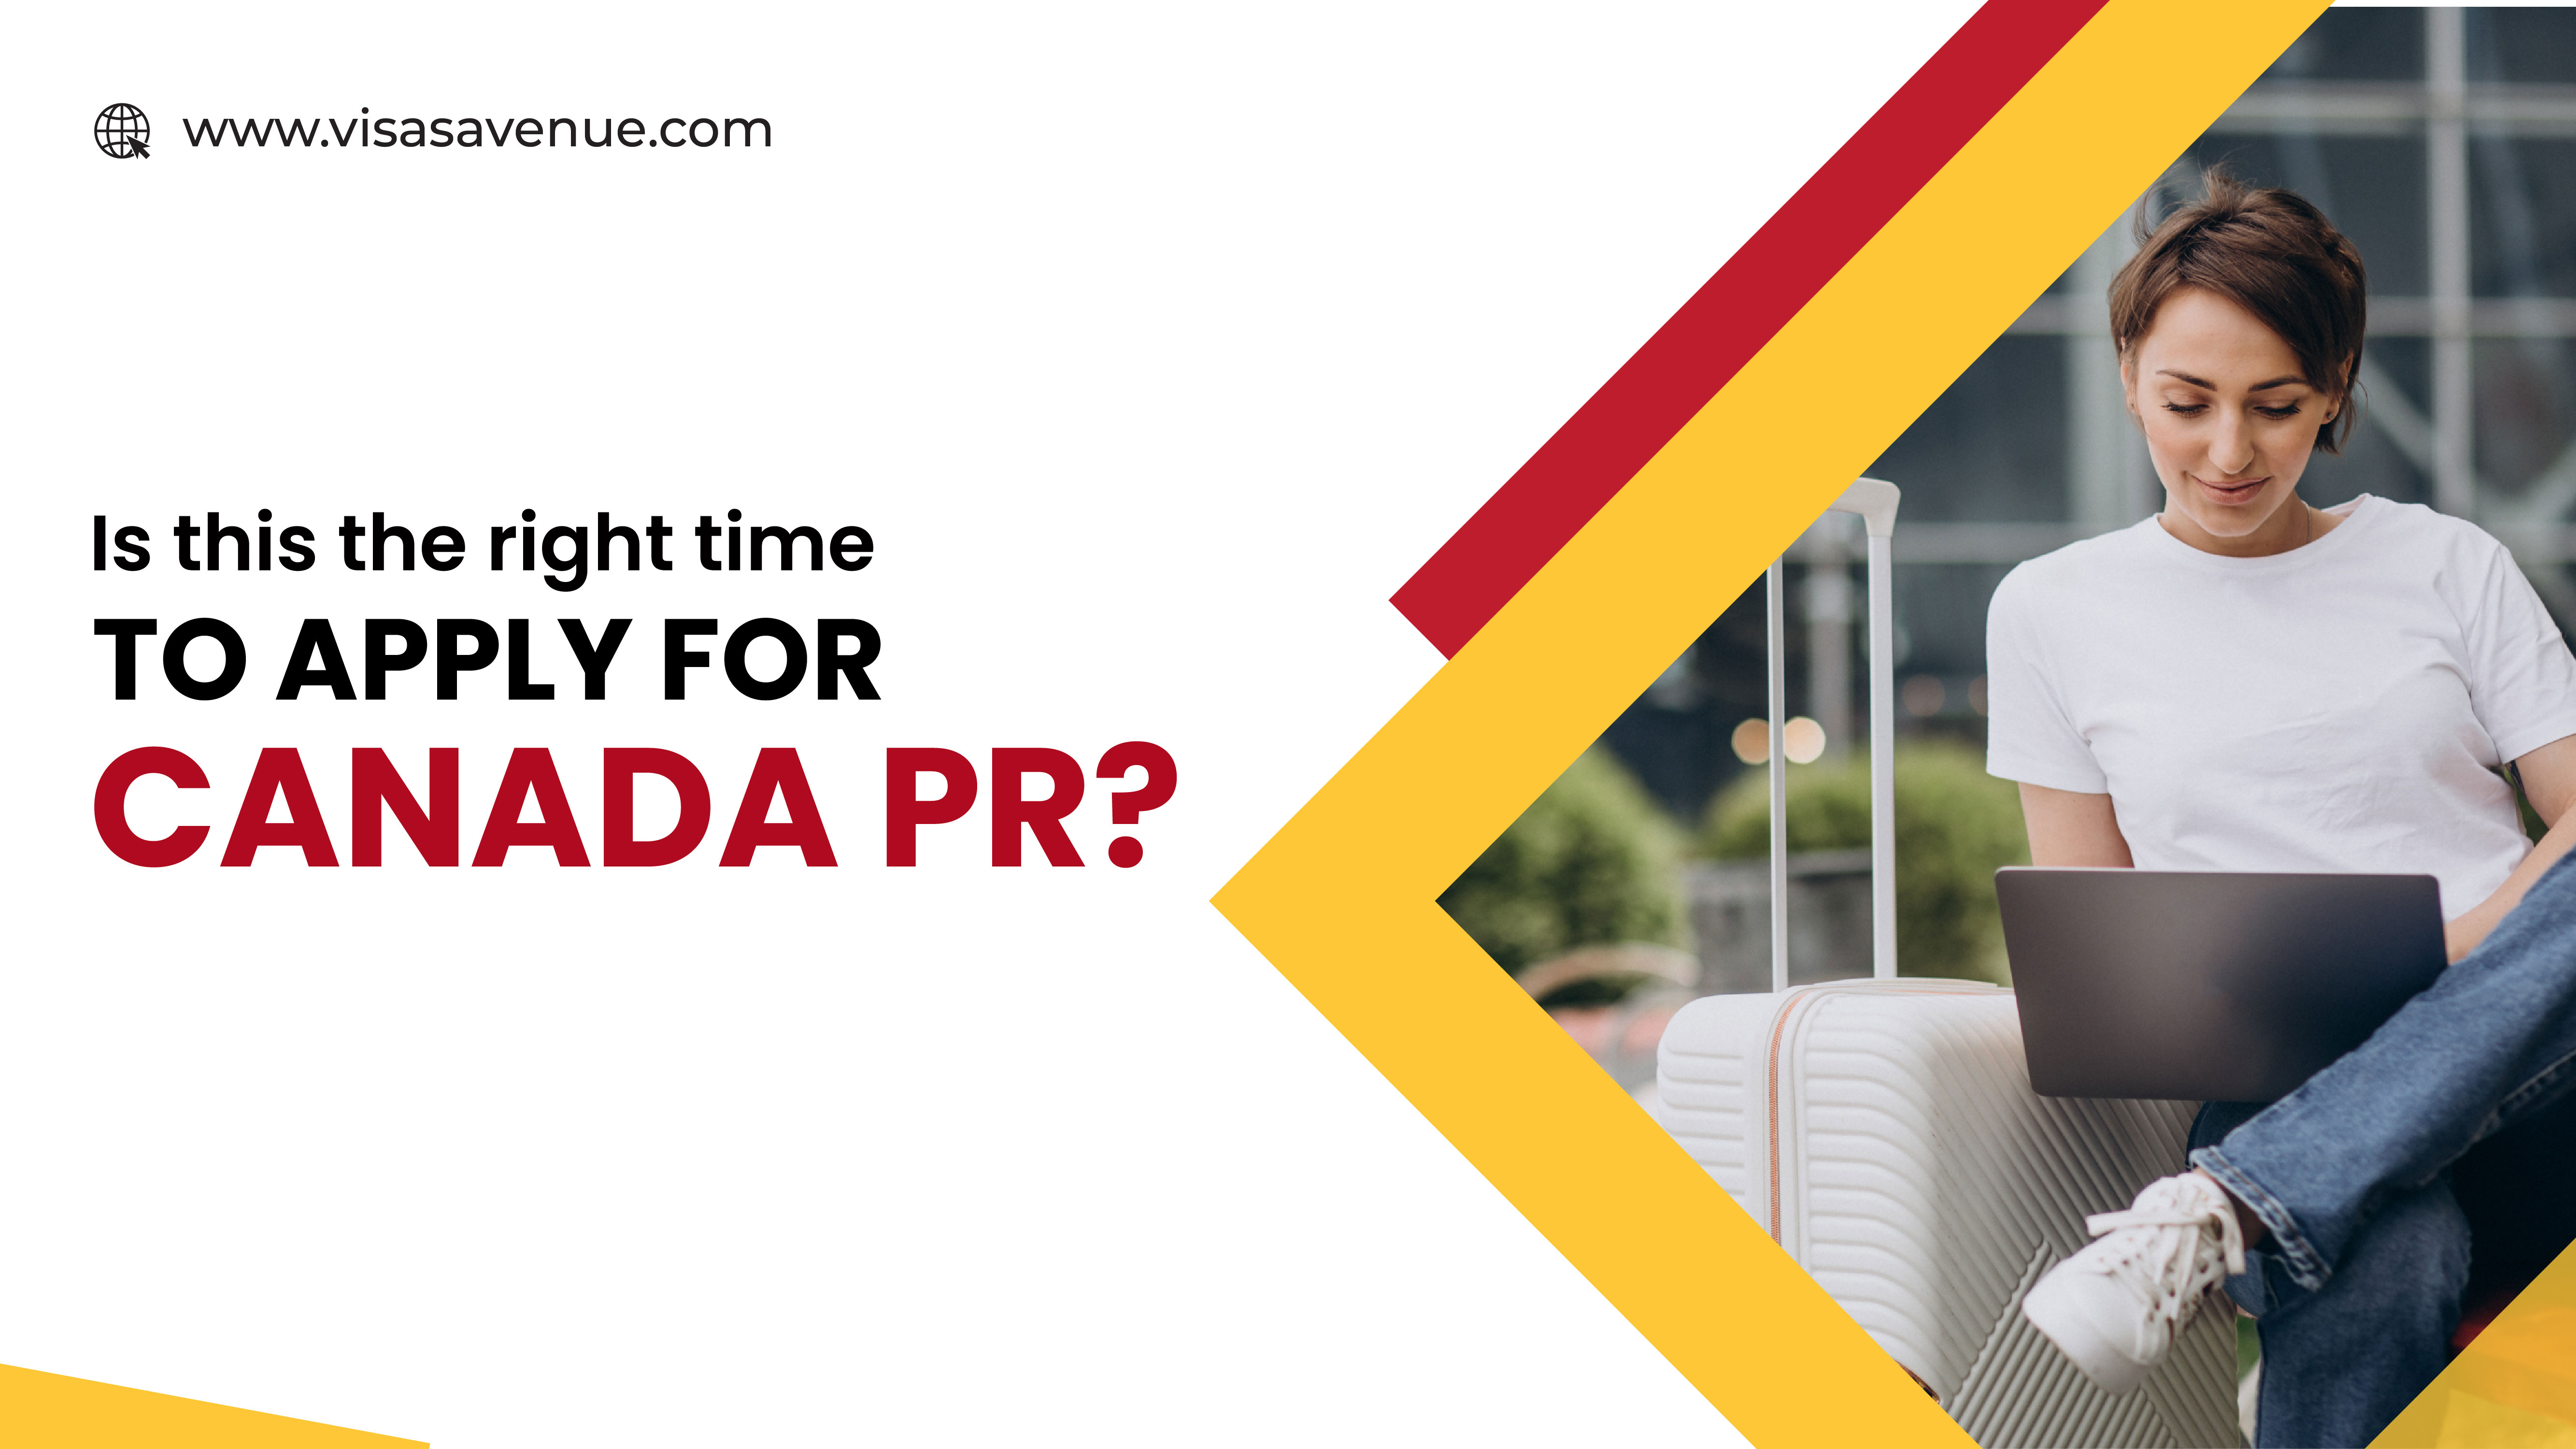 Is this the right time to apply for Canada PR?